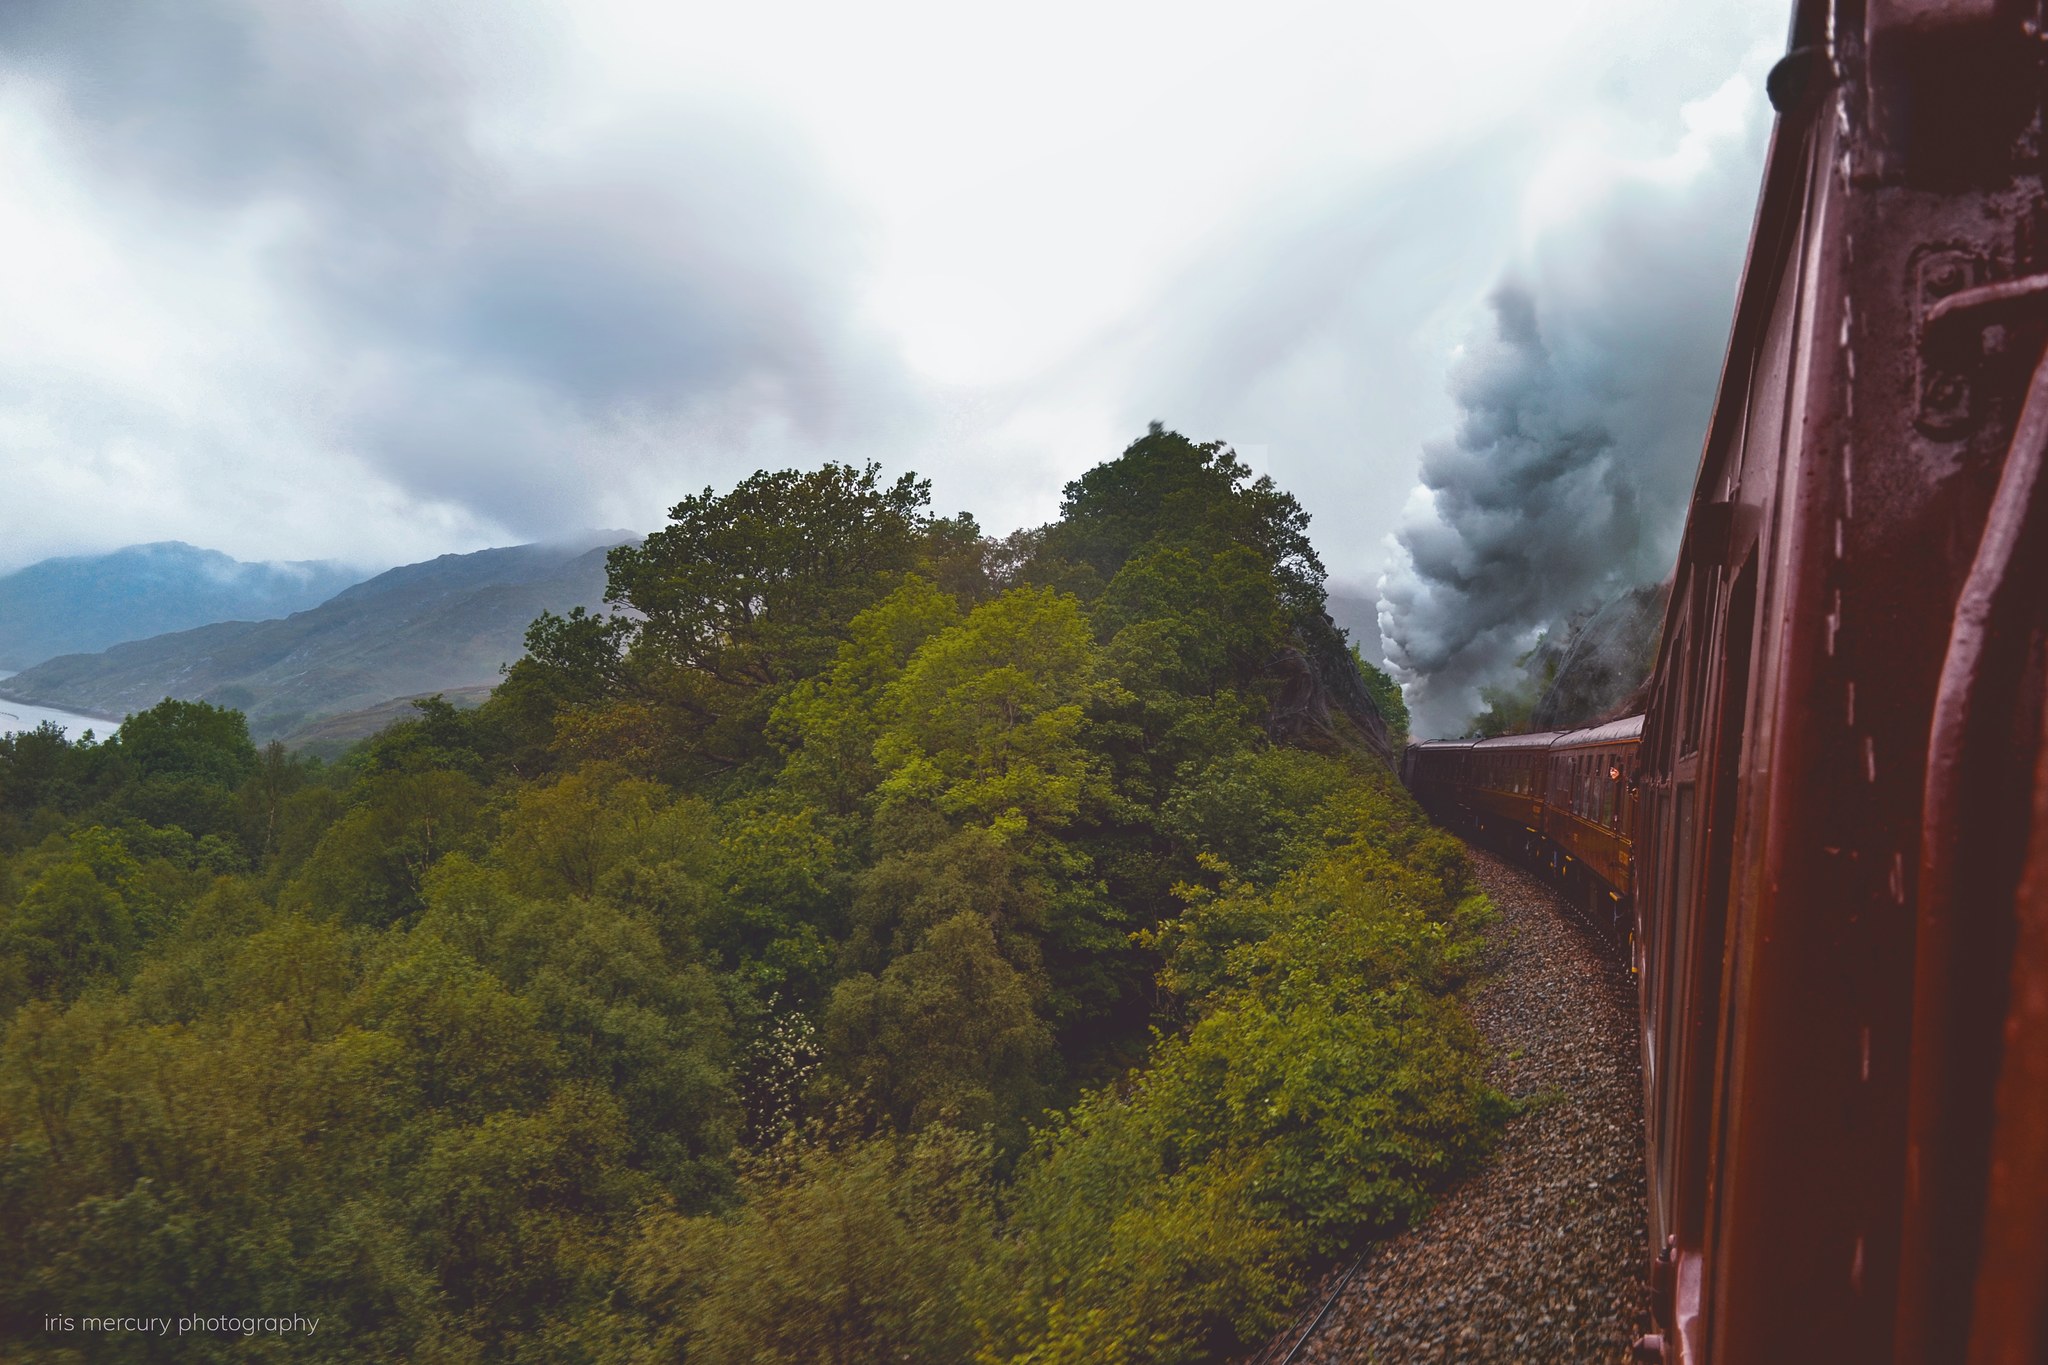 The Jacobite, Scotland - My, Scotland, Harry Potter and the Deathly Hallows, Harry Potter, Potter addicts, A train, Beginning photographer, Longpost